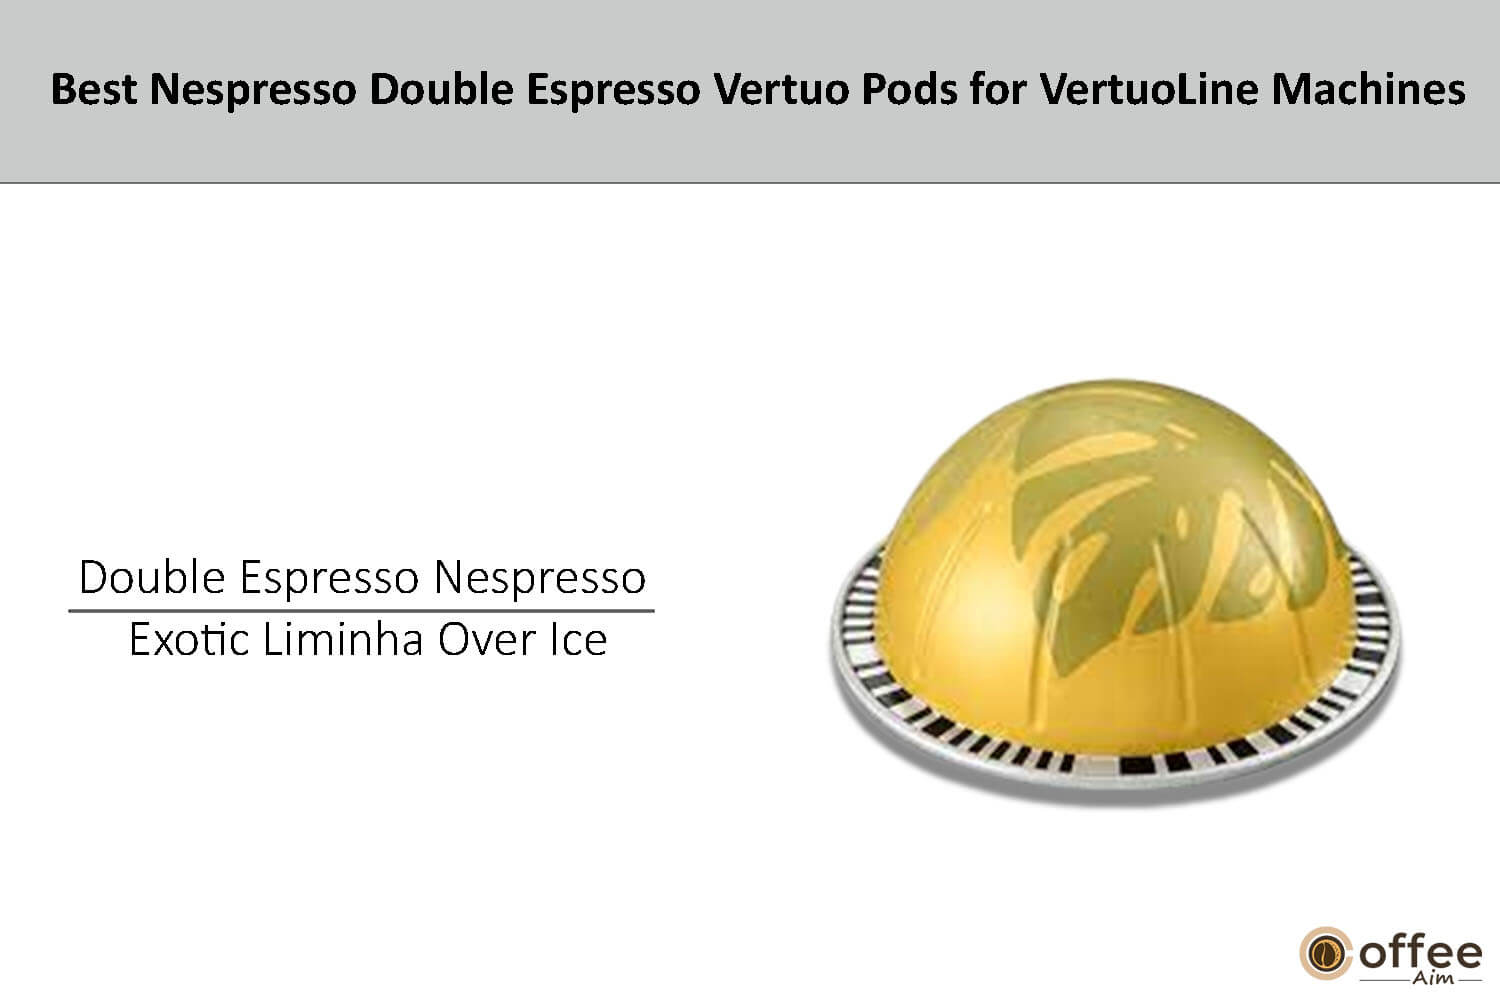 In this image, I'll explain double espresso nespresso exotic liminha over ice.